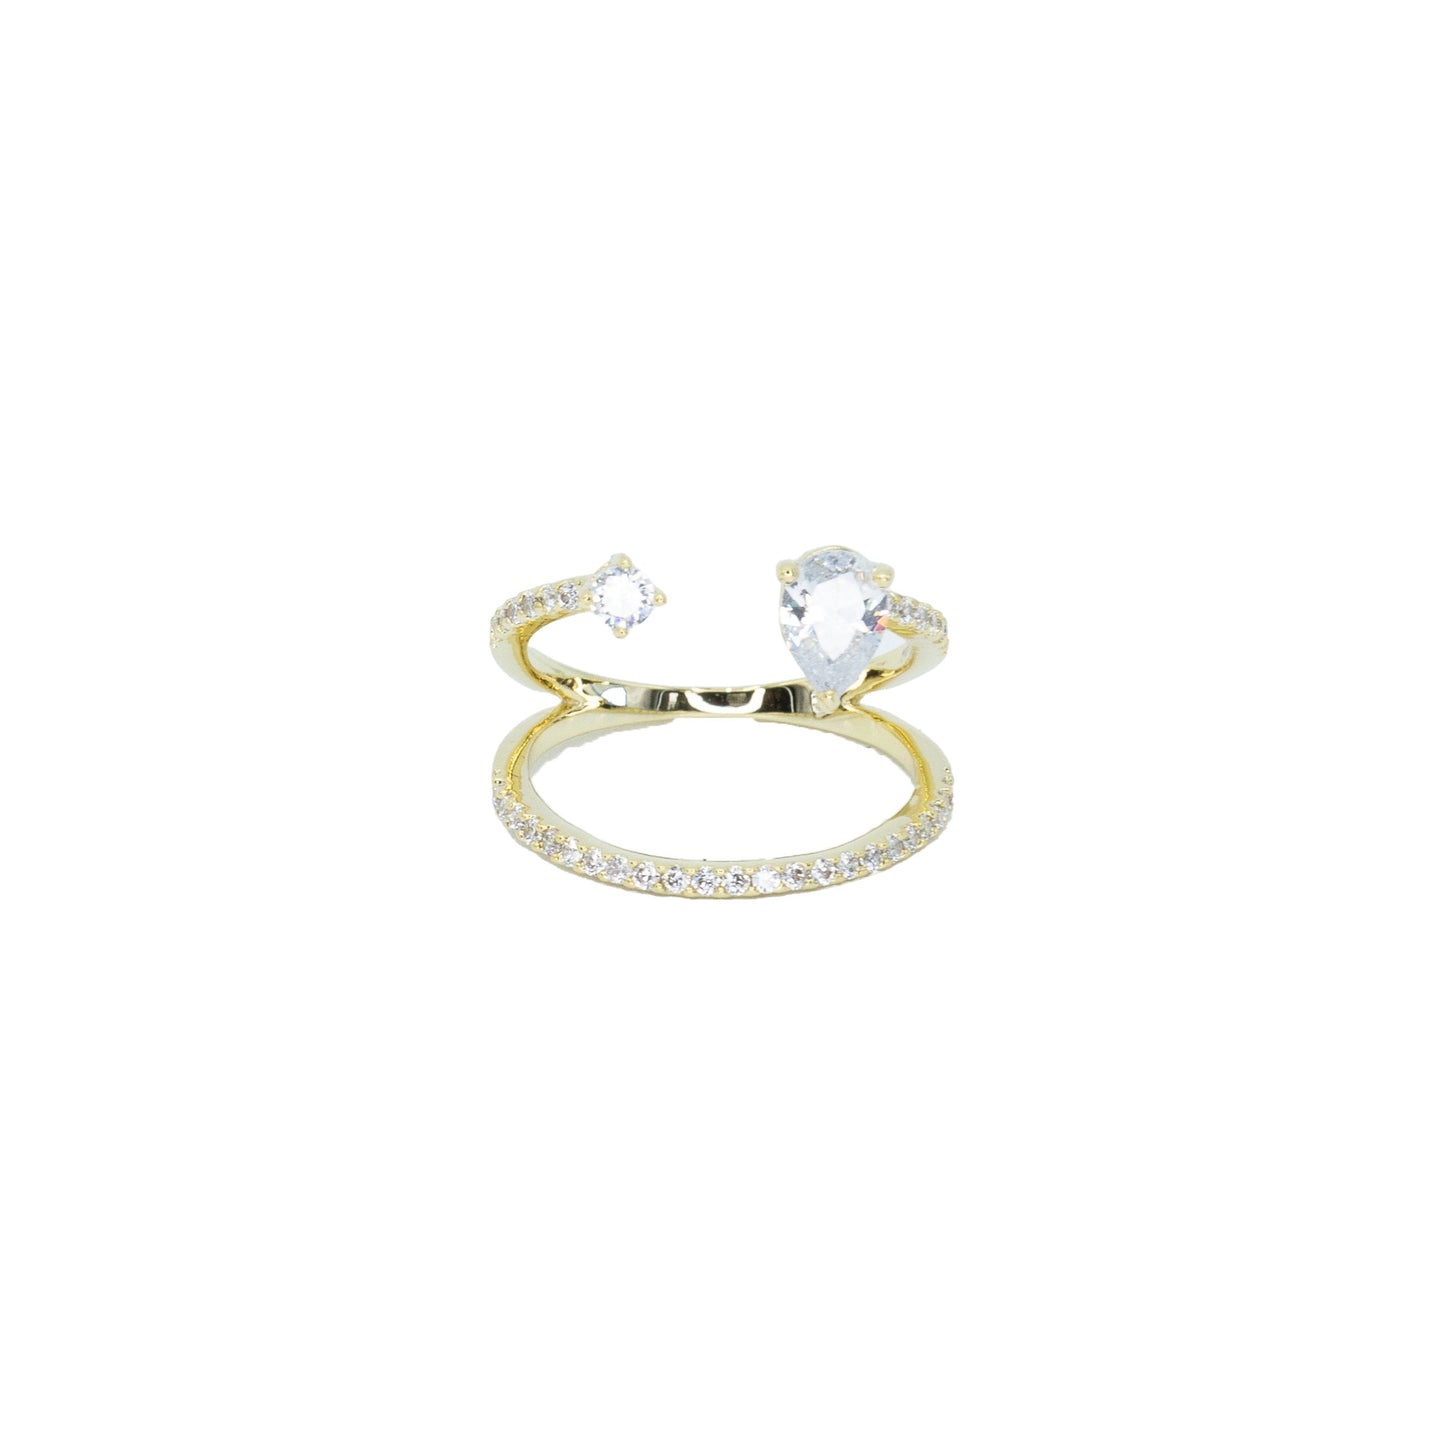 The Double Stone Pave Ring